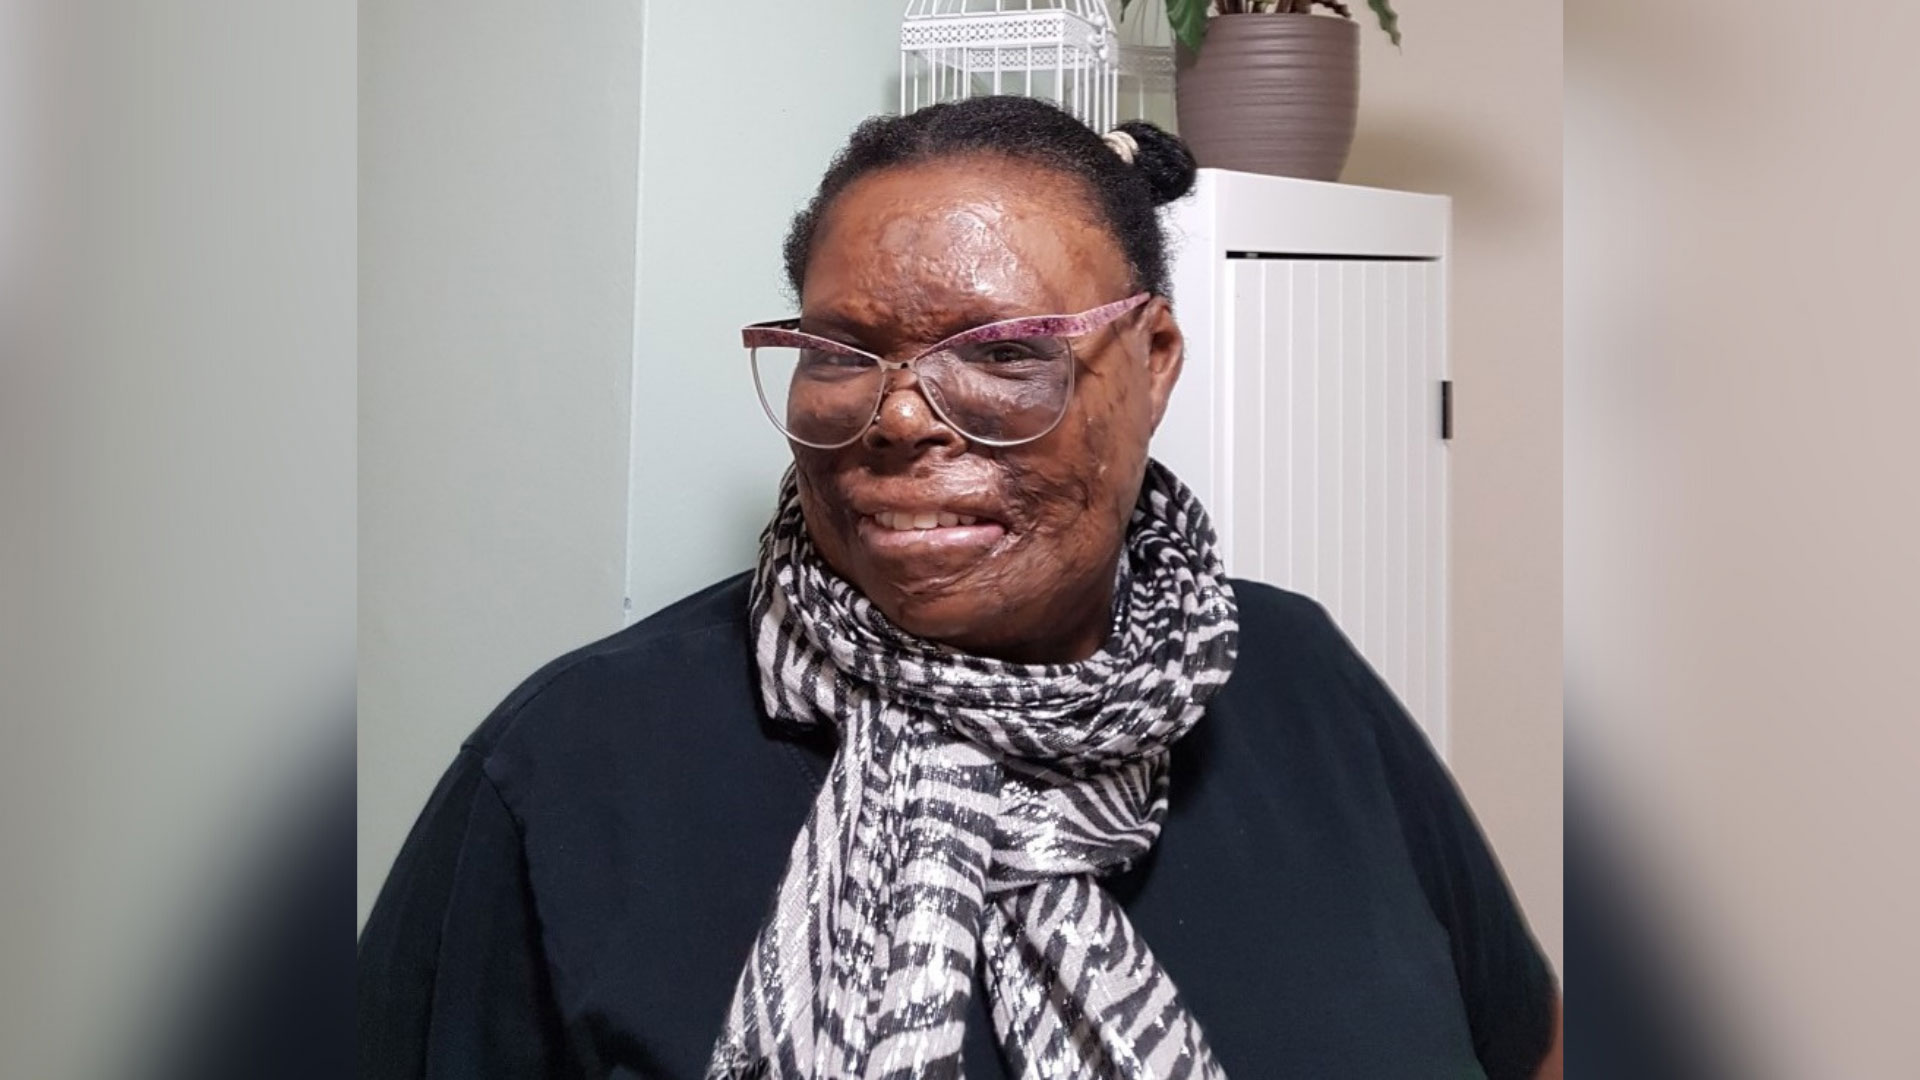 Campaigner Chrissie who is a Black women with a visible difference wearing a white and black scarf and black top, pink glasses and her hair in two buns on top of her head.